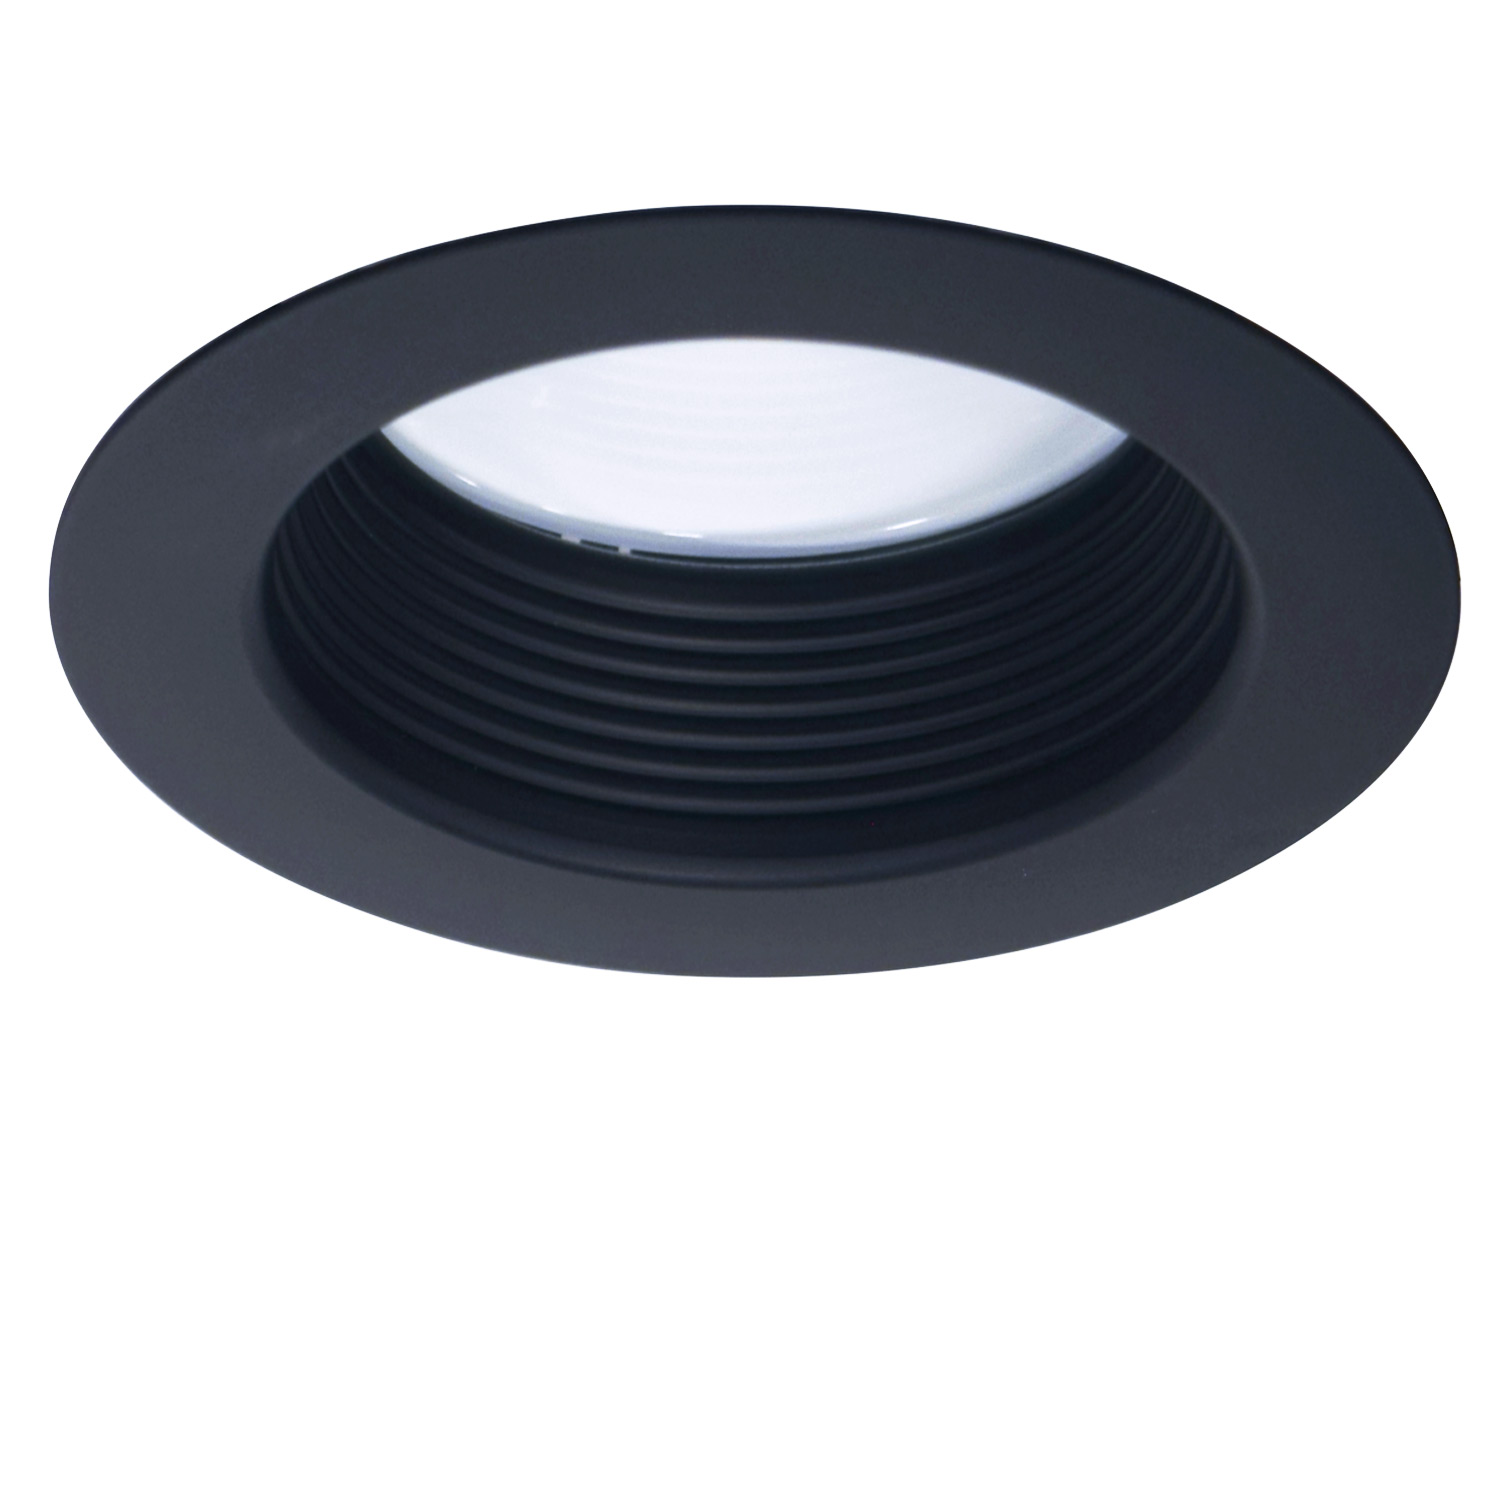 Product image for R4 Series Two Piece Reflector with Lower Baffle and Flat Lens